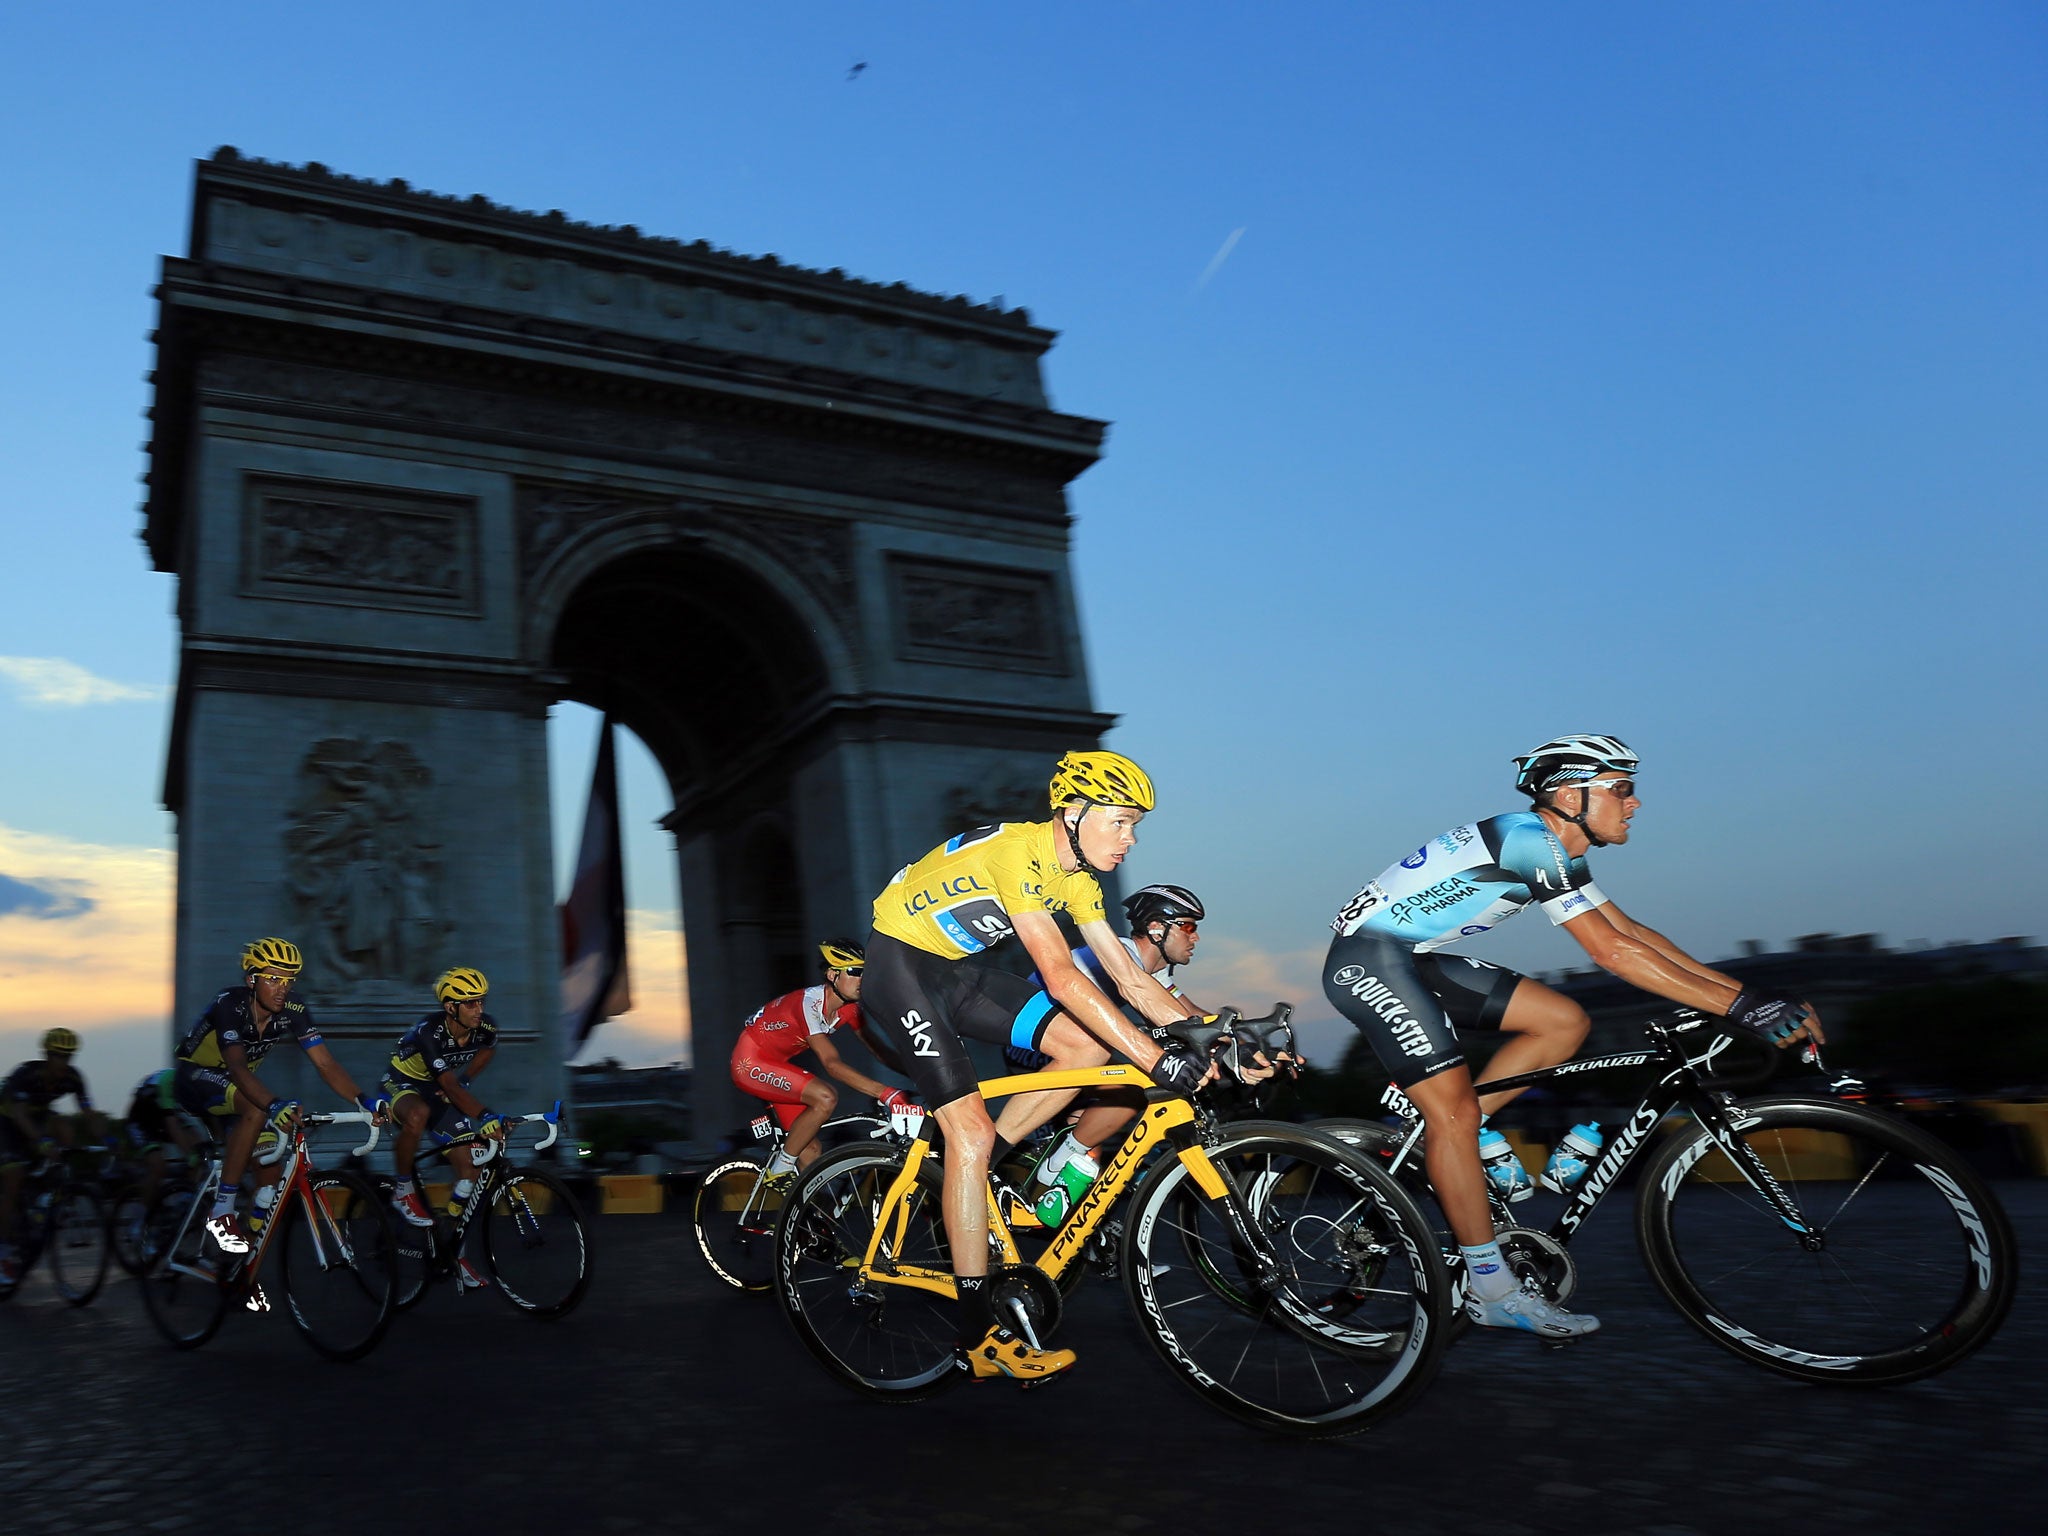 Will Chris Froome wear yellow in Paris again in 2015?